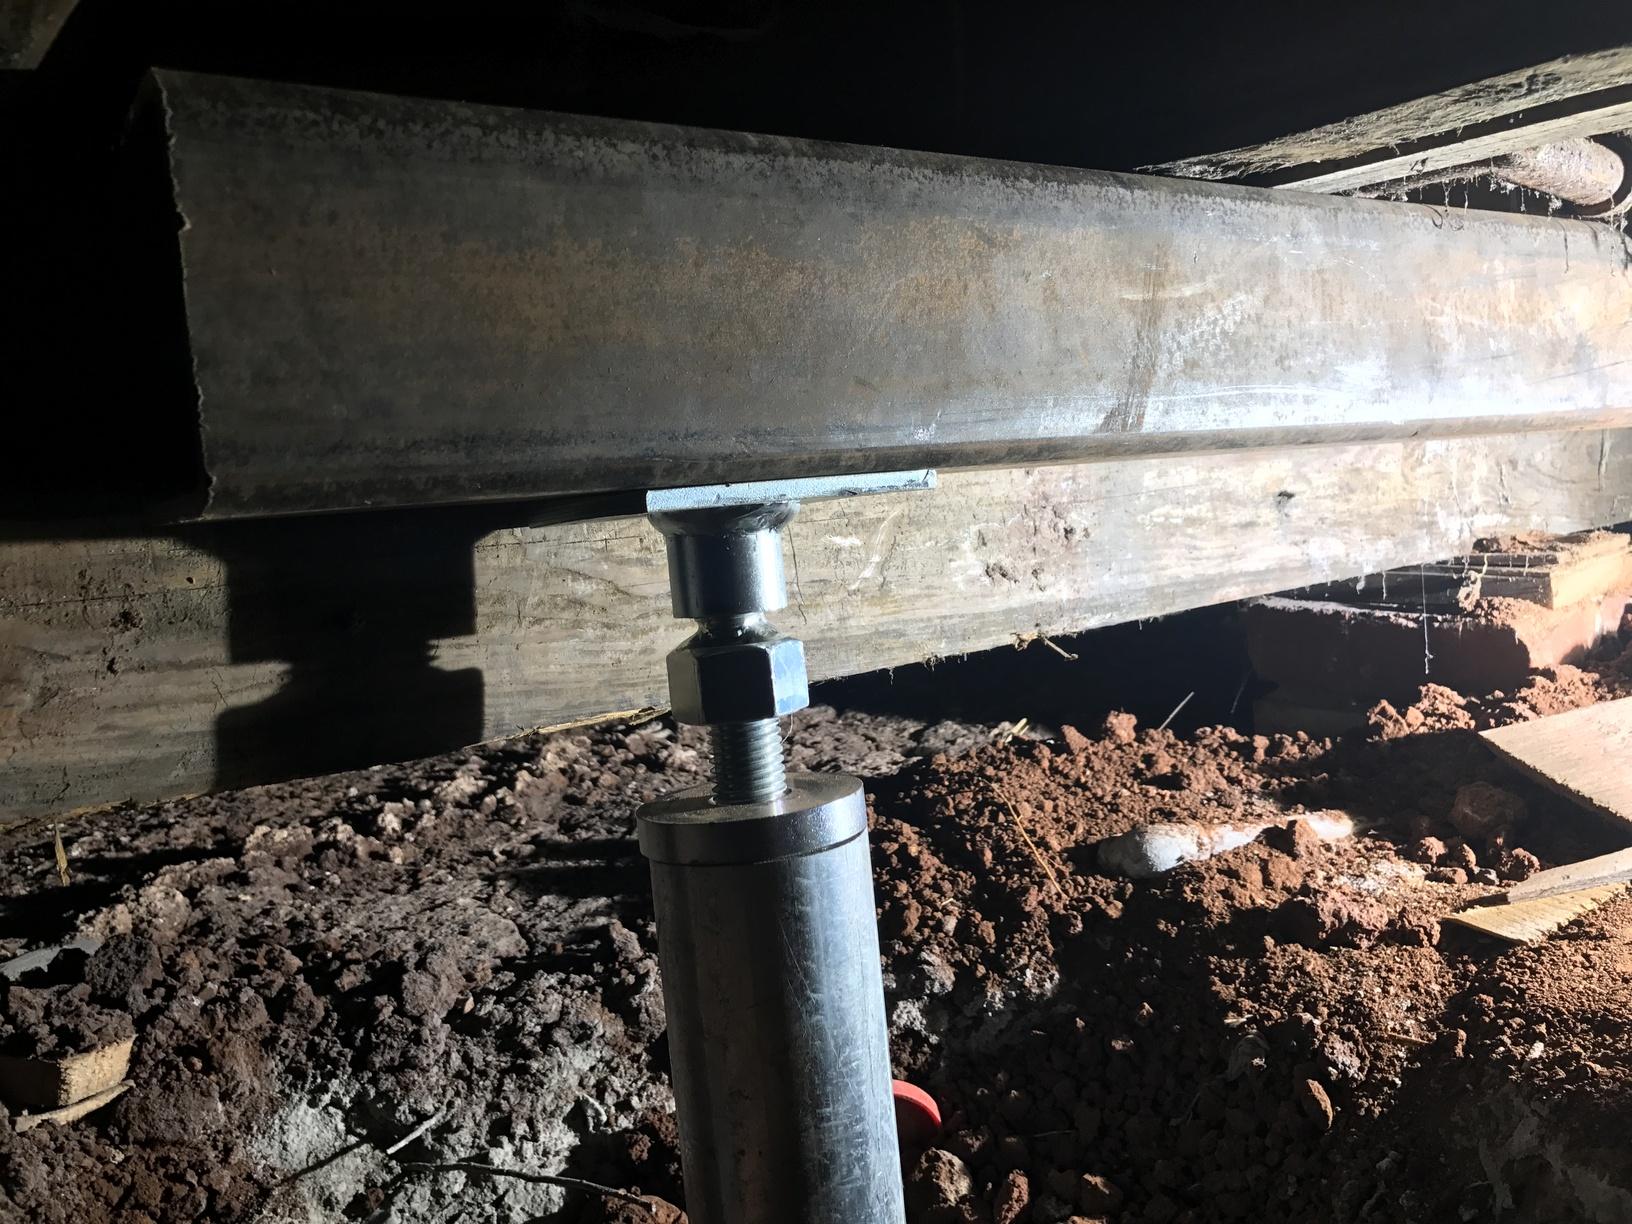 Smart Jacks were installed to lift and level the floor framing. The beams were constructed of 4inch steel tubing for strength and head clearance.